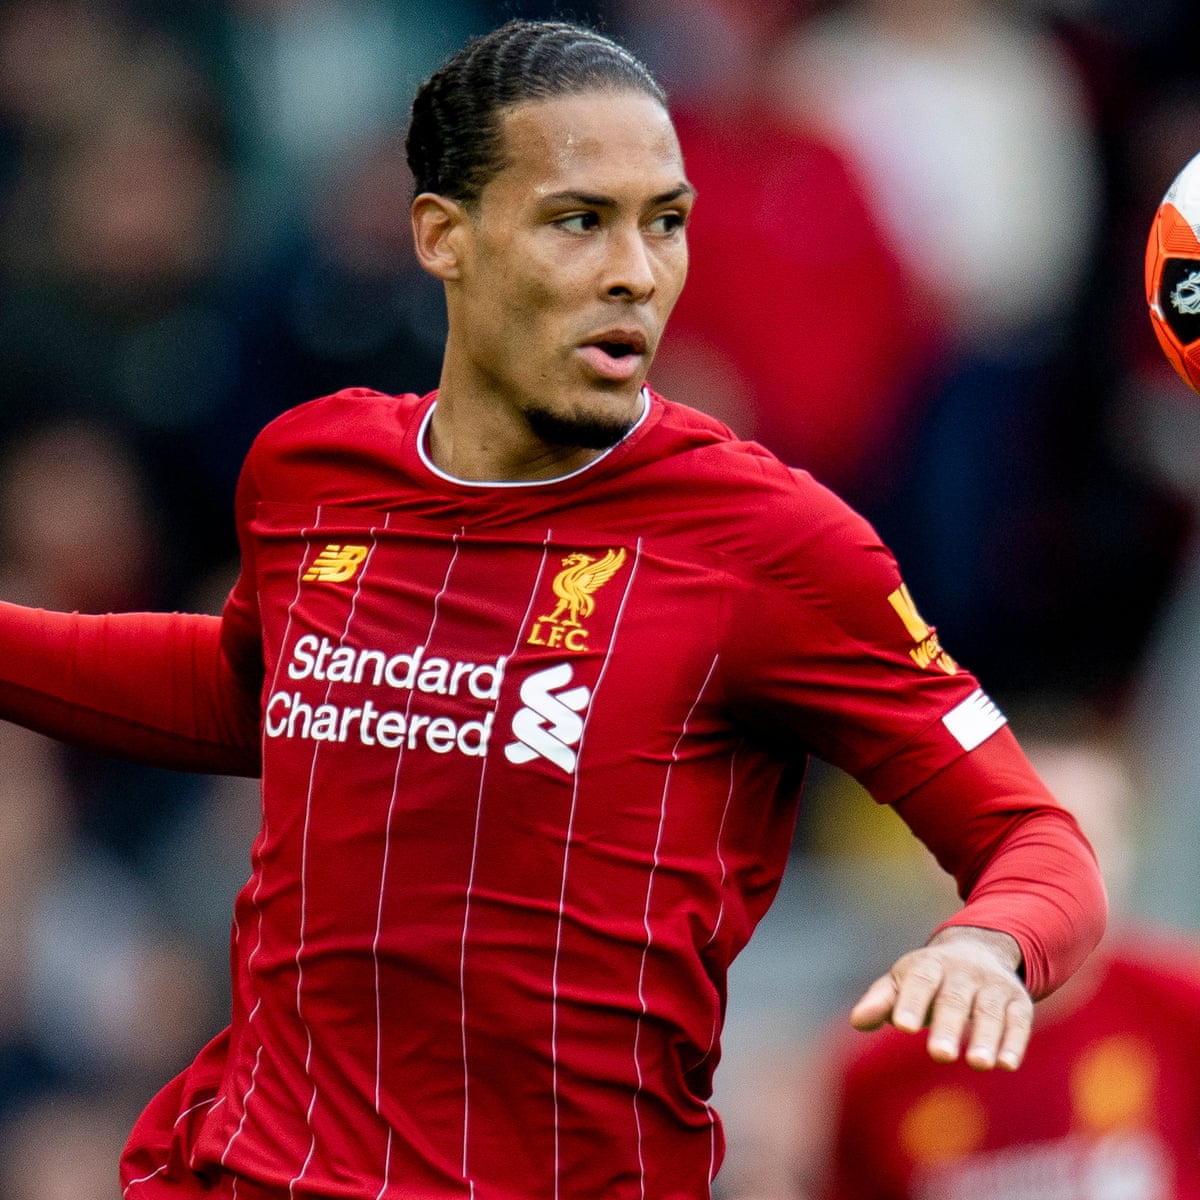 Virgil van Dijk: 'Some suggest I make it look easy, but every game is tough' | Liverpool | The Guardian